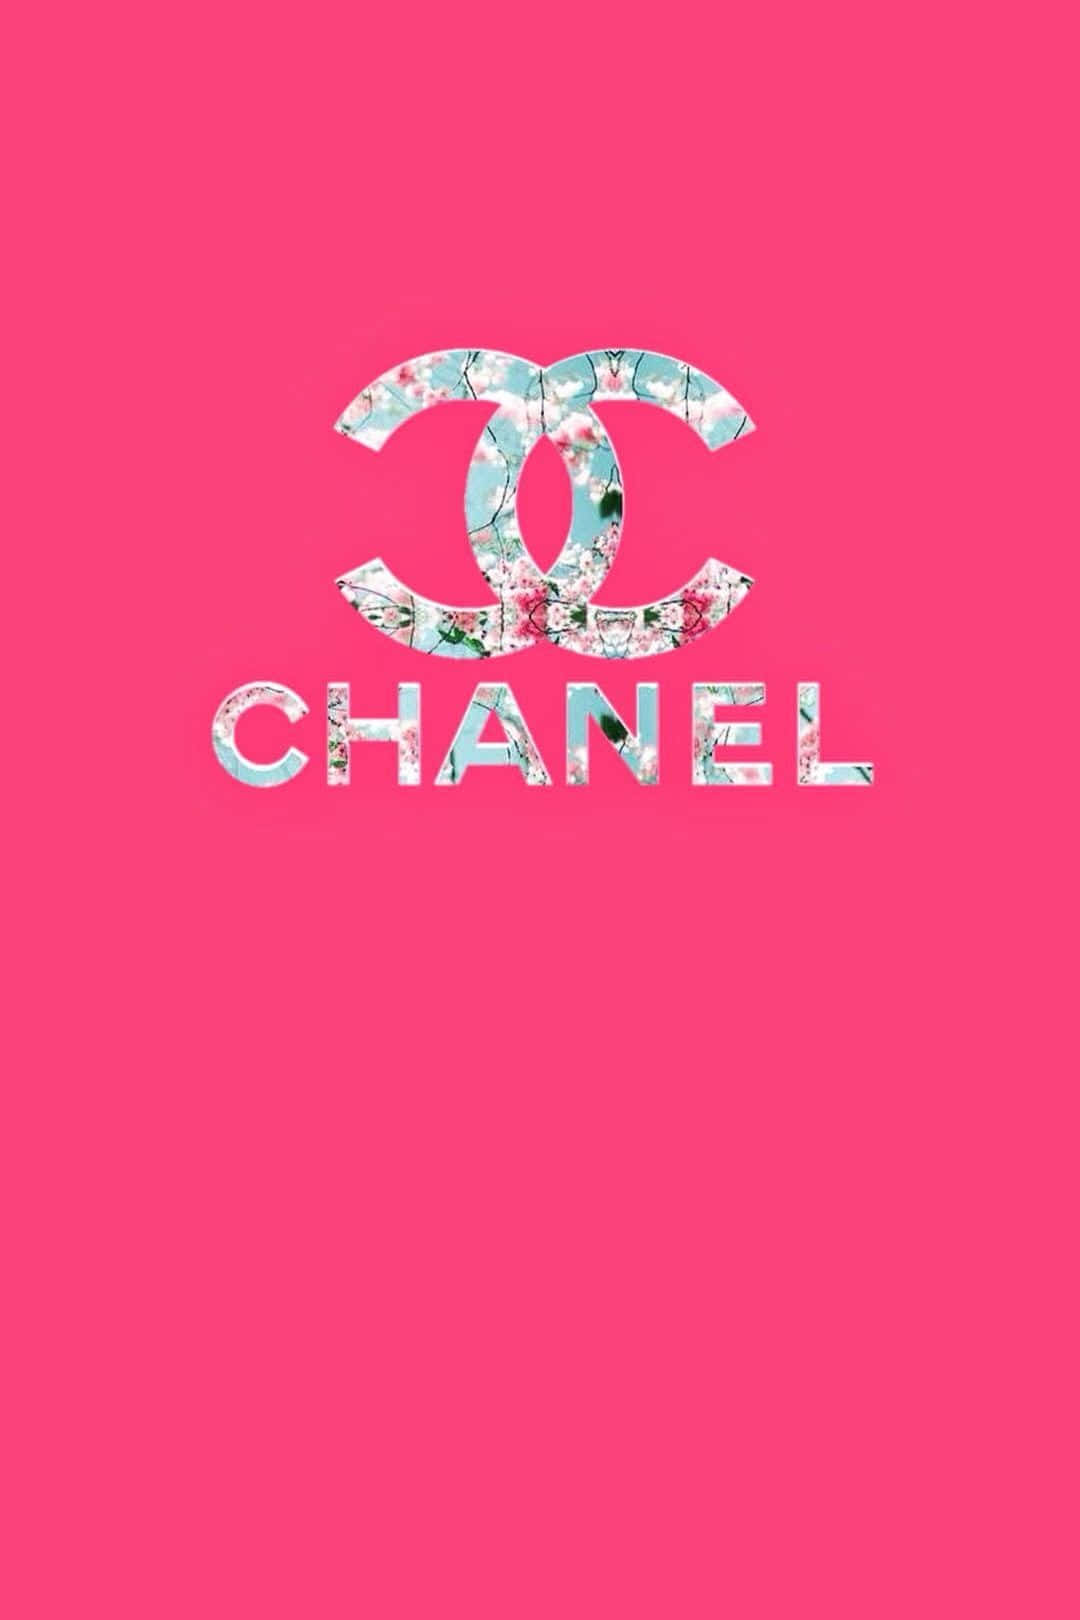 Chanel Logo On A Pink Background